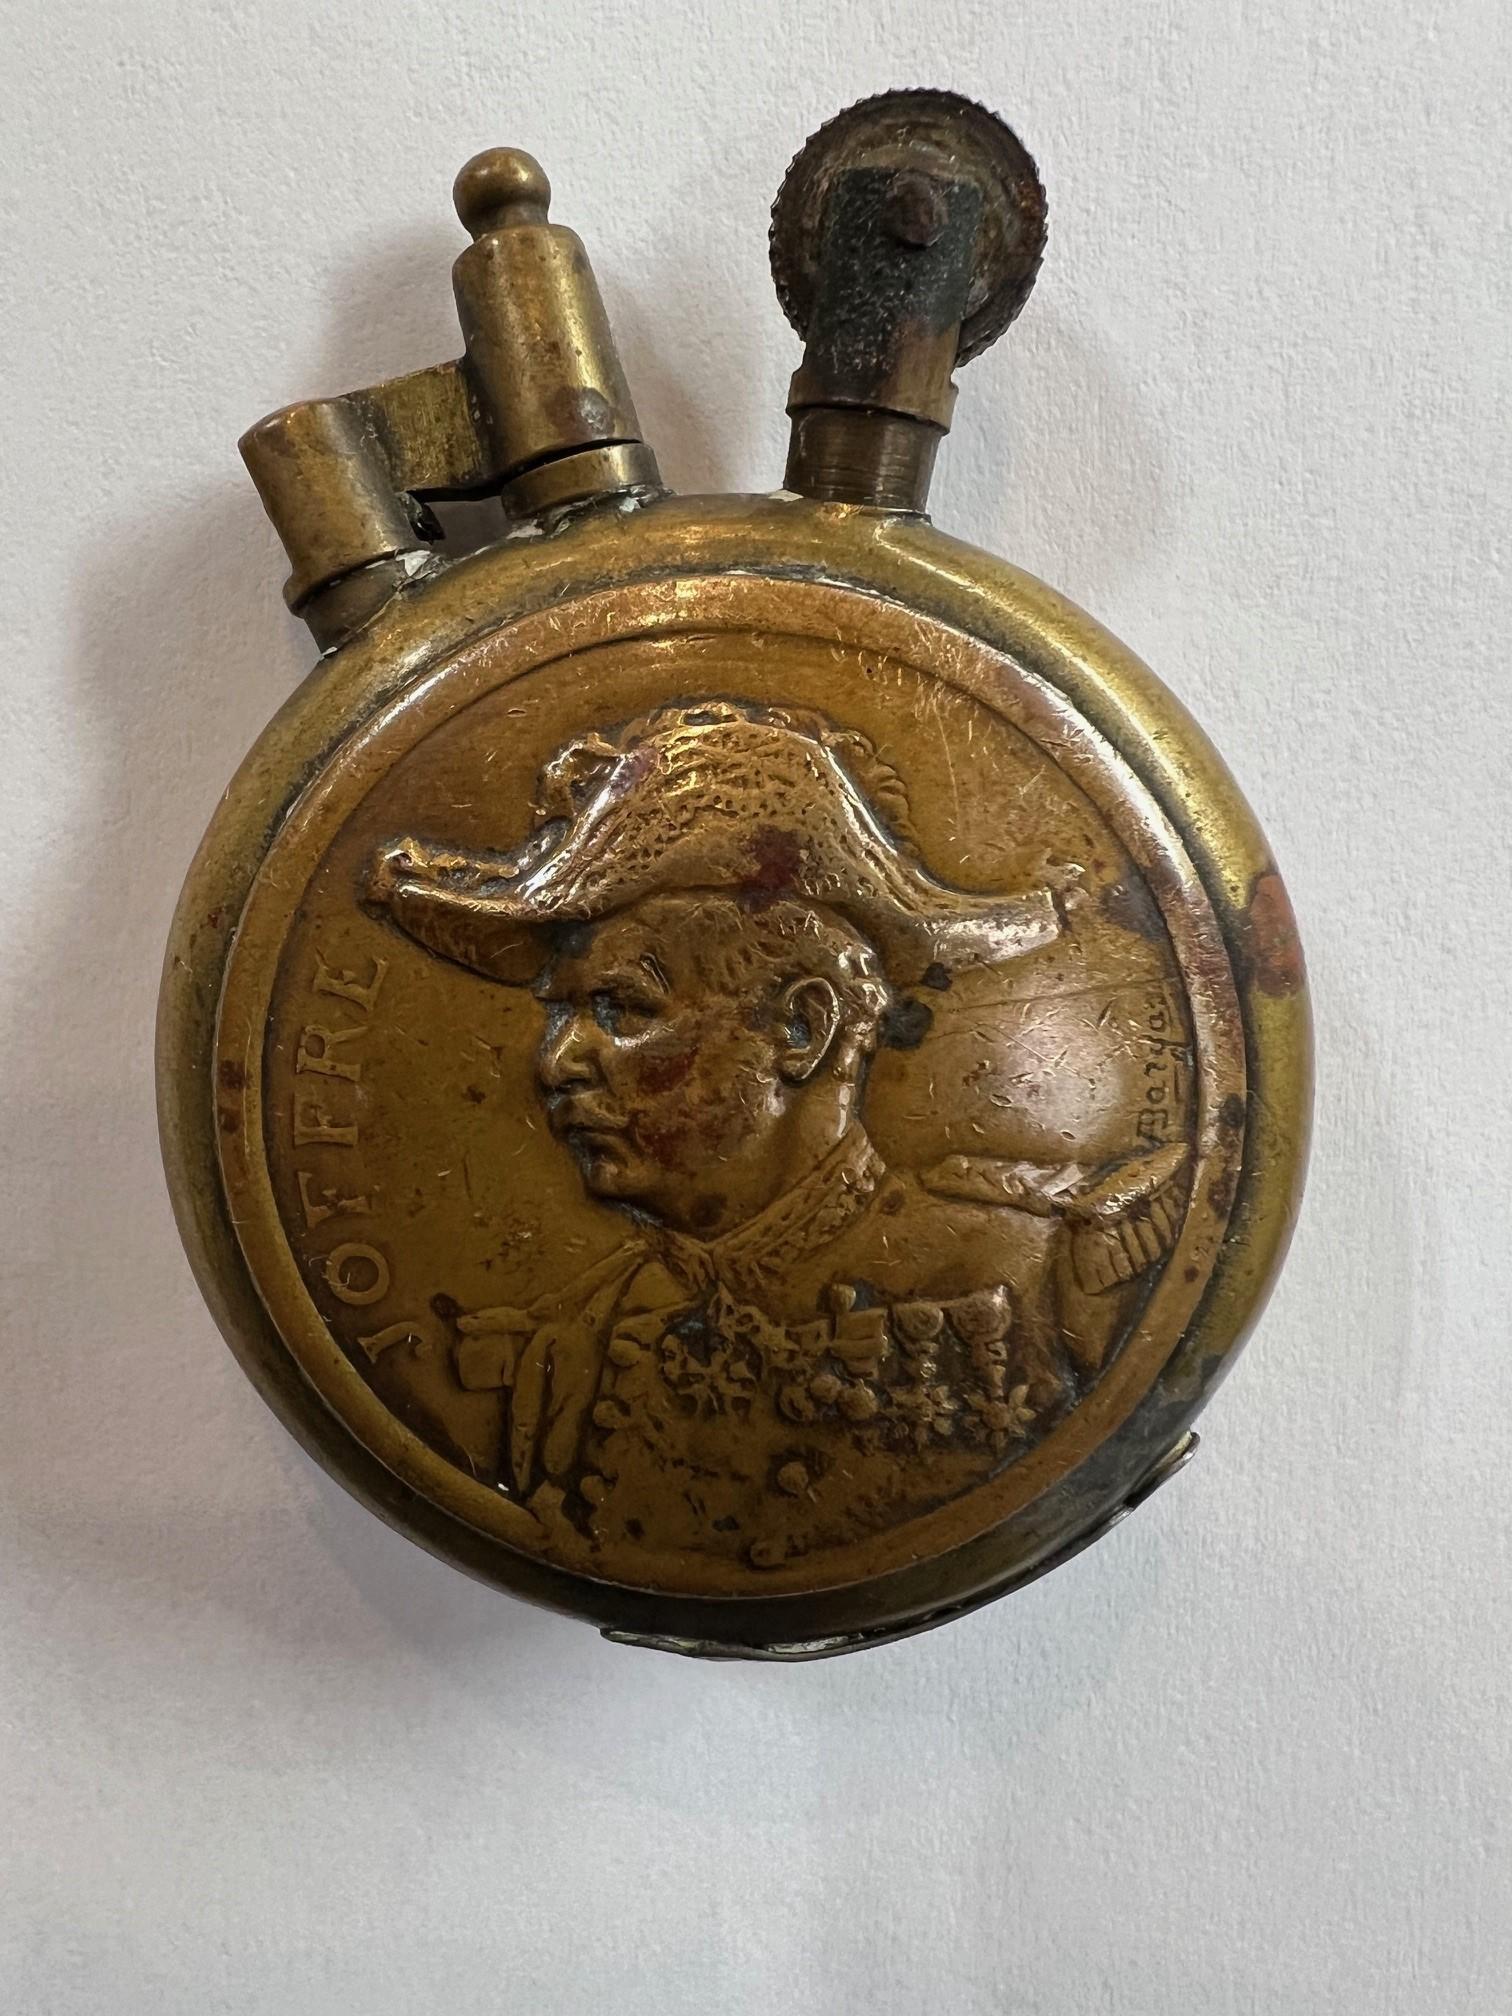 Very unique Trench art, WW1 era brass petrol lighter, on one side is the portrait of Marshal 
Joseph Joffre. Marshal Joffre was the Commander in Chief of the French forces on the Western Front from 1914 to 1916. He is best known for his victory